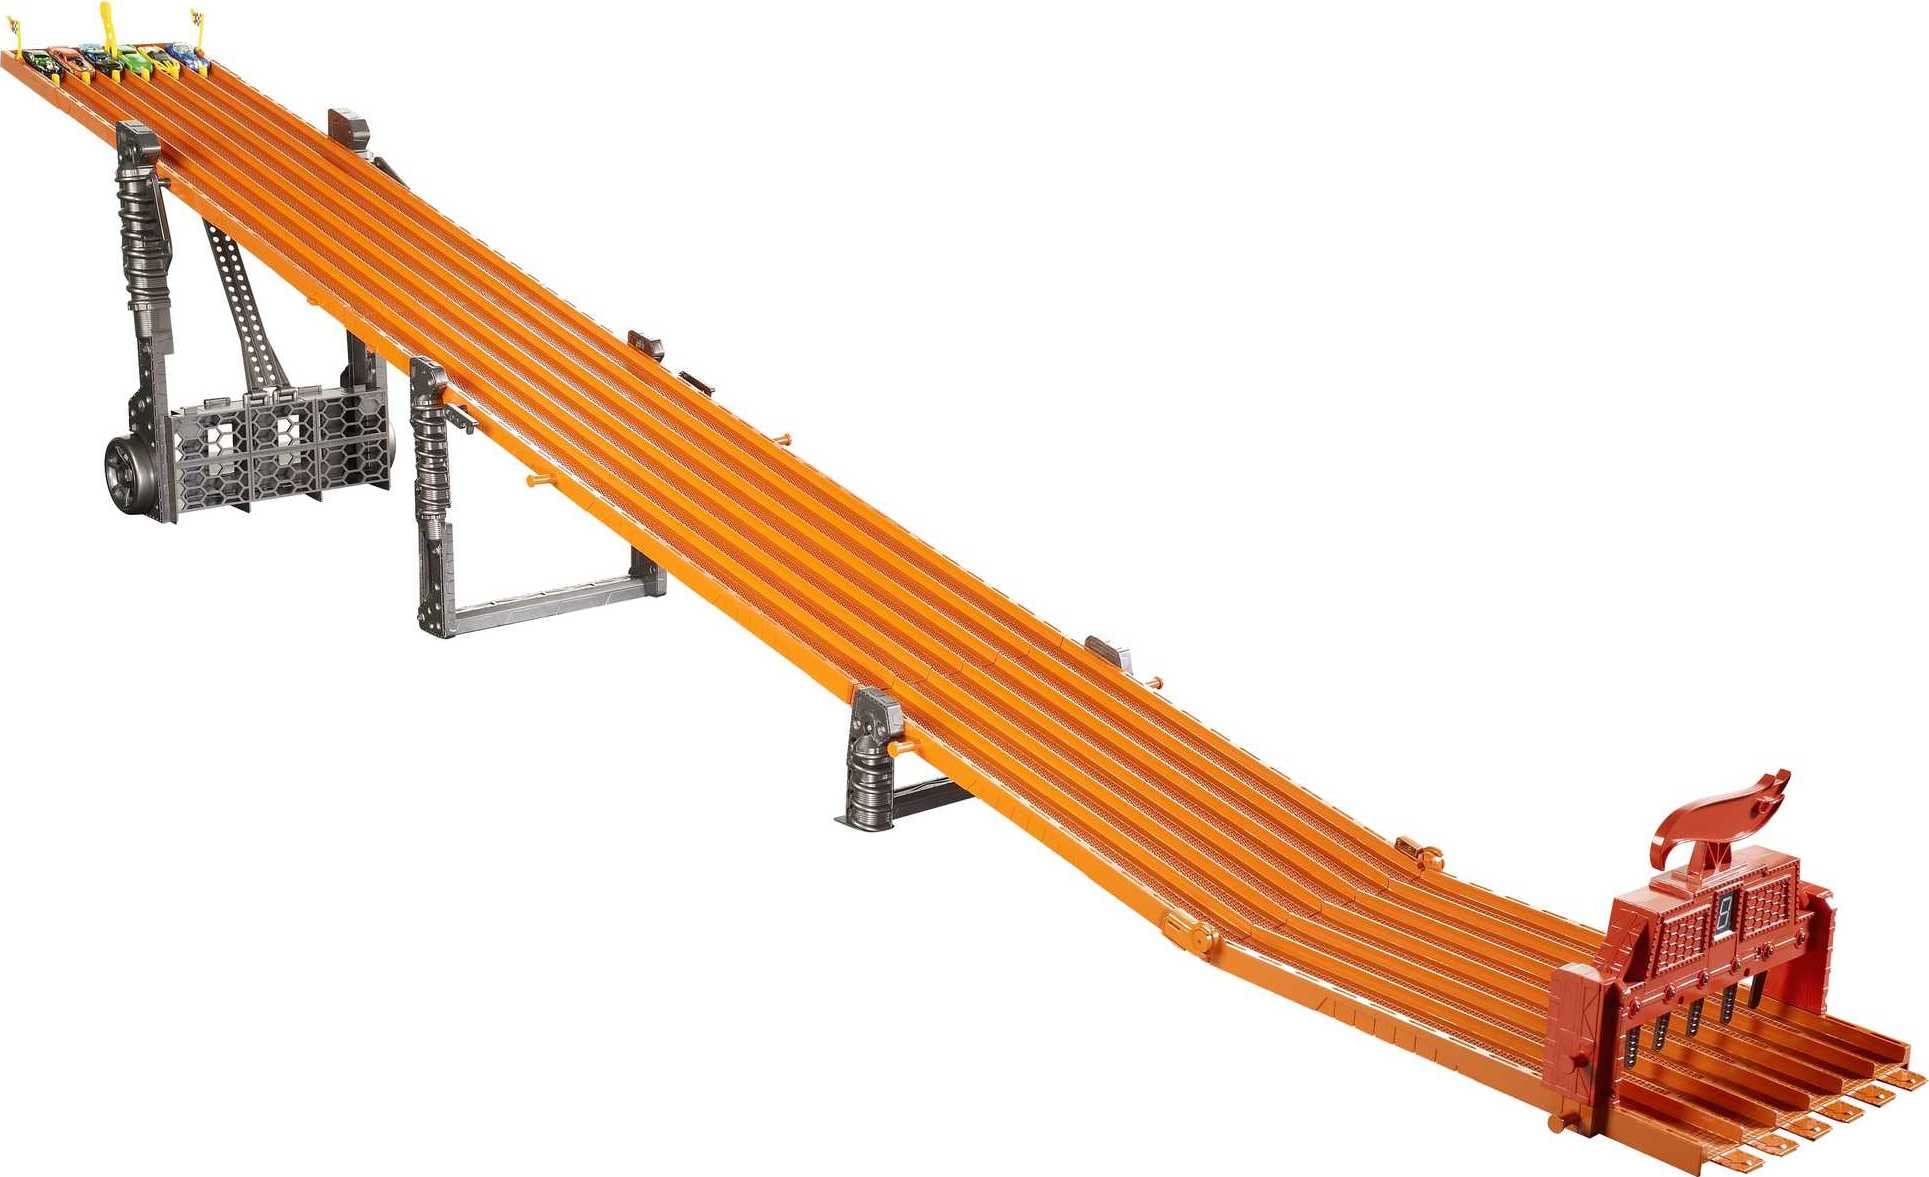 Hot Wheels Toy Car Track Set Super 6-Lane Raceway, 8ft Track that Folds Up for Storage with 6 1:64 Scale Cars